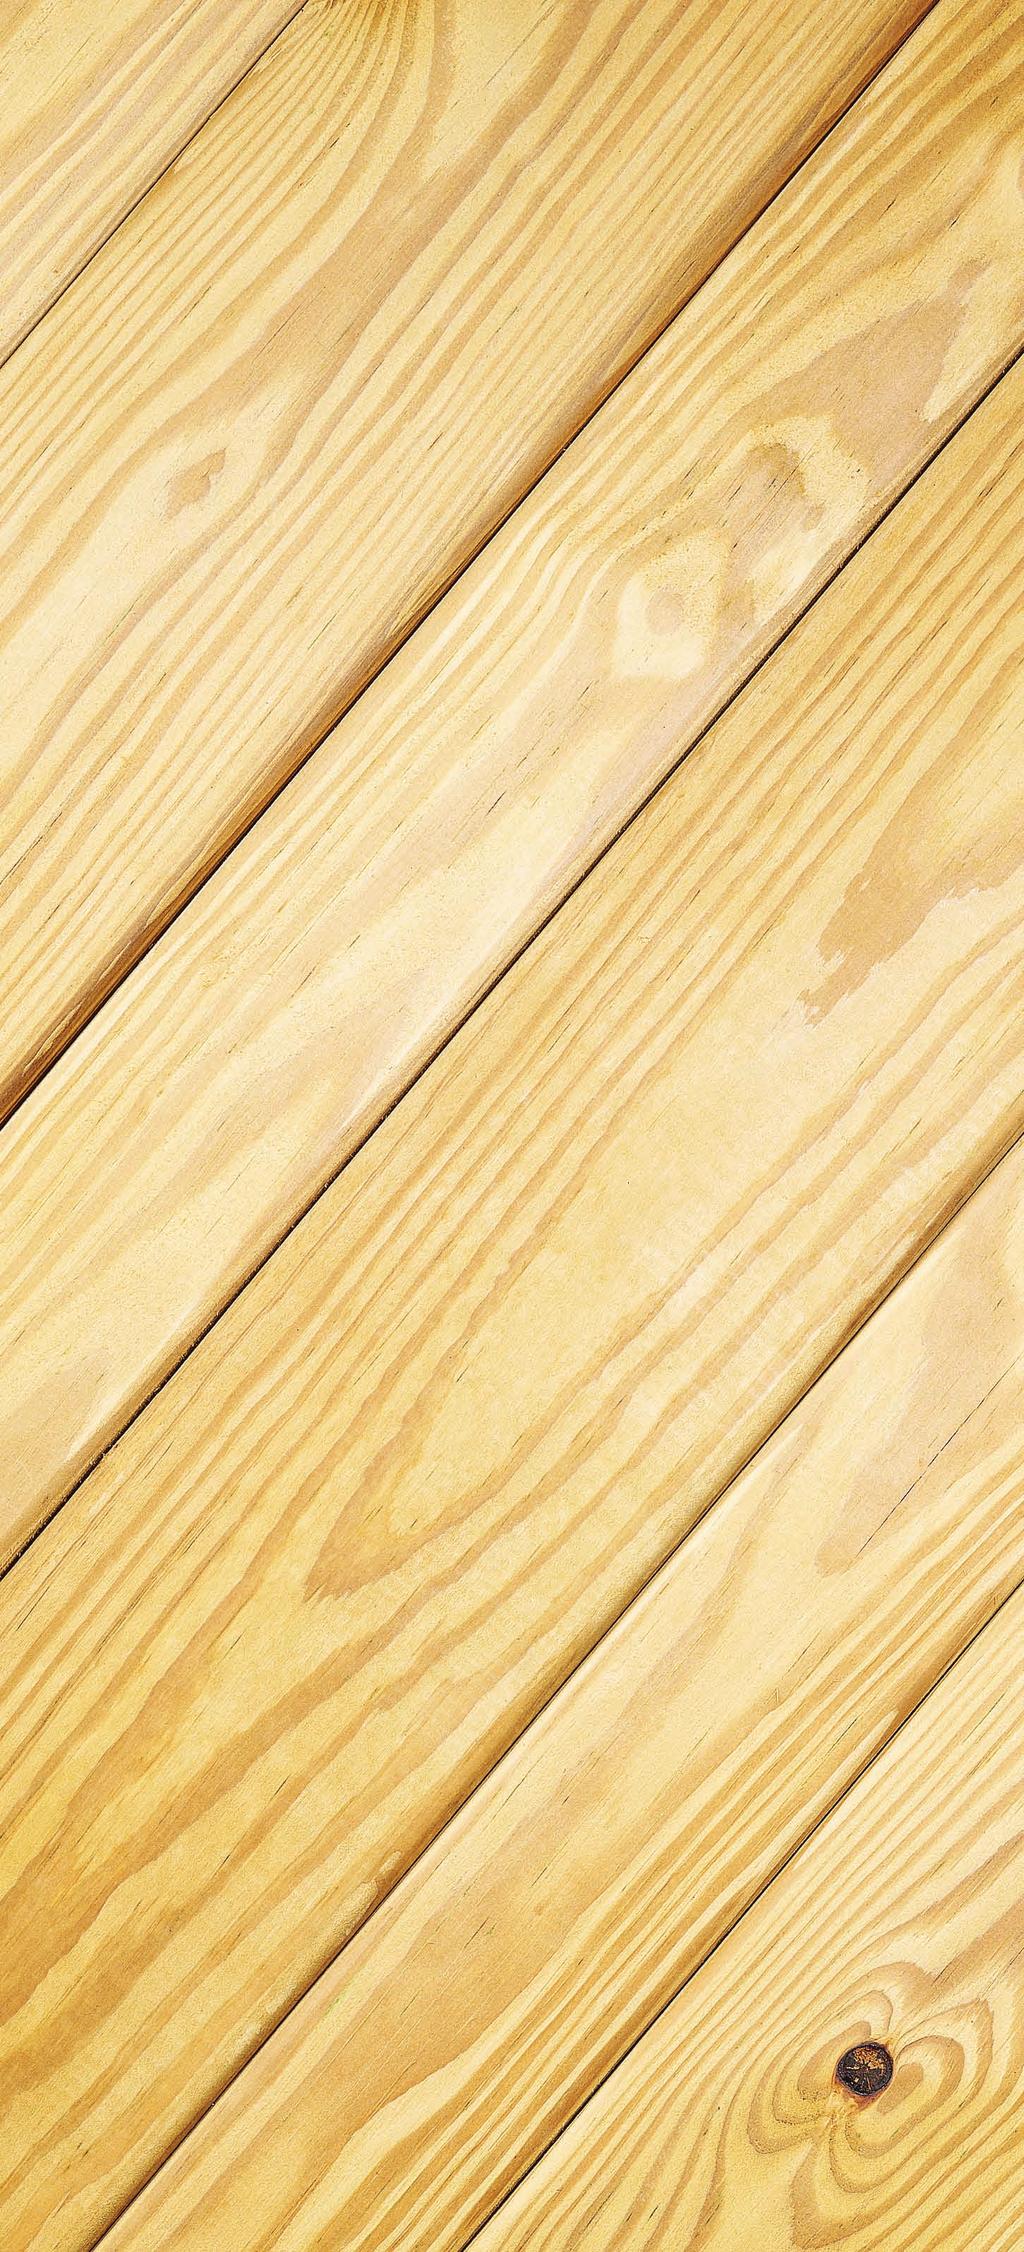 The Green Choice Wood products are the most environmentally responsible building material available, making them the green choice.